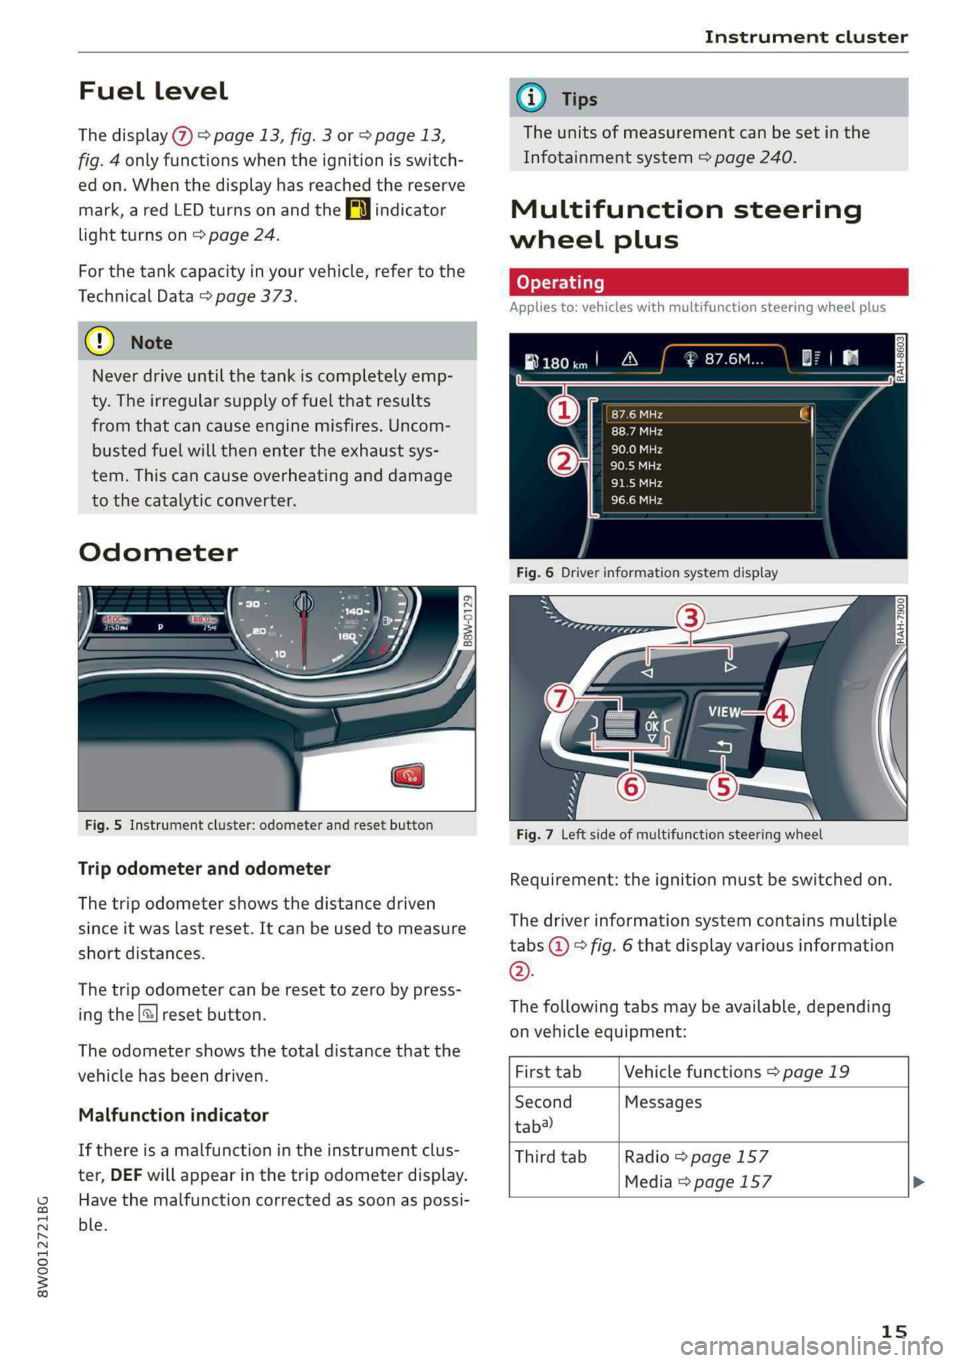 AUDI S4 2019  Owners Manual 8W0012721BG
Instrumentcluster
 
Fuellevel
Thedisplay>page13,fig.3orpage13,
fig.4onlyfunctionswhentheignitionisswitch-
edon.Whenthedisplayhasreached thereserve
mark,aredLEDturnsonandtheAlindicator
ligh